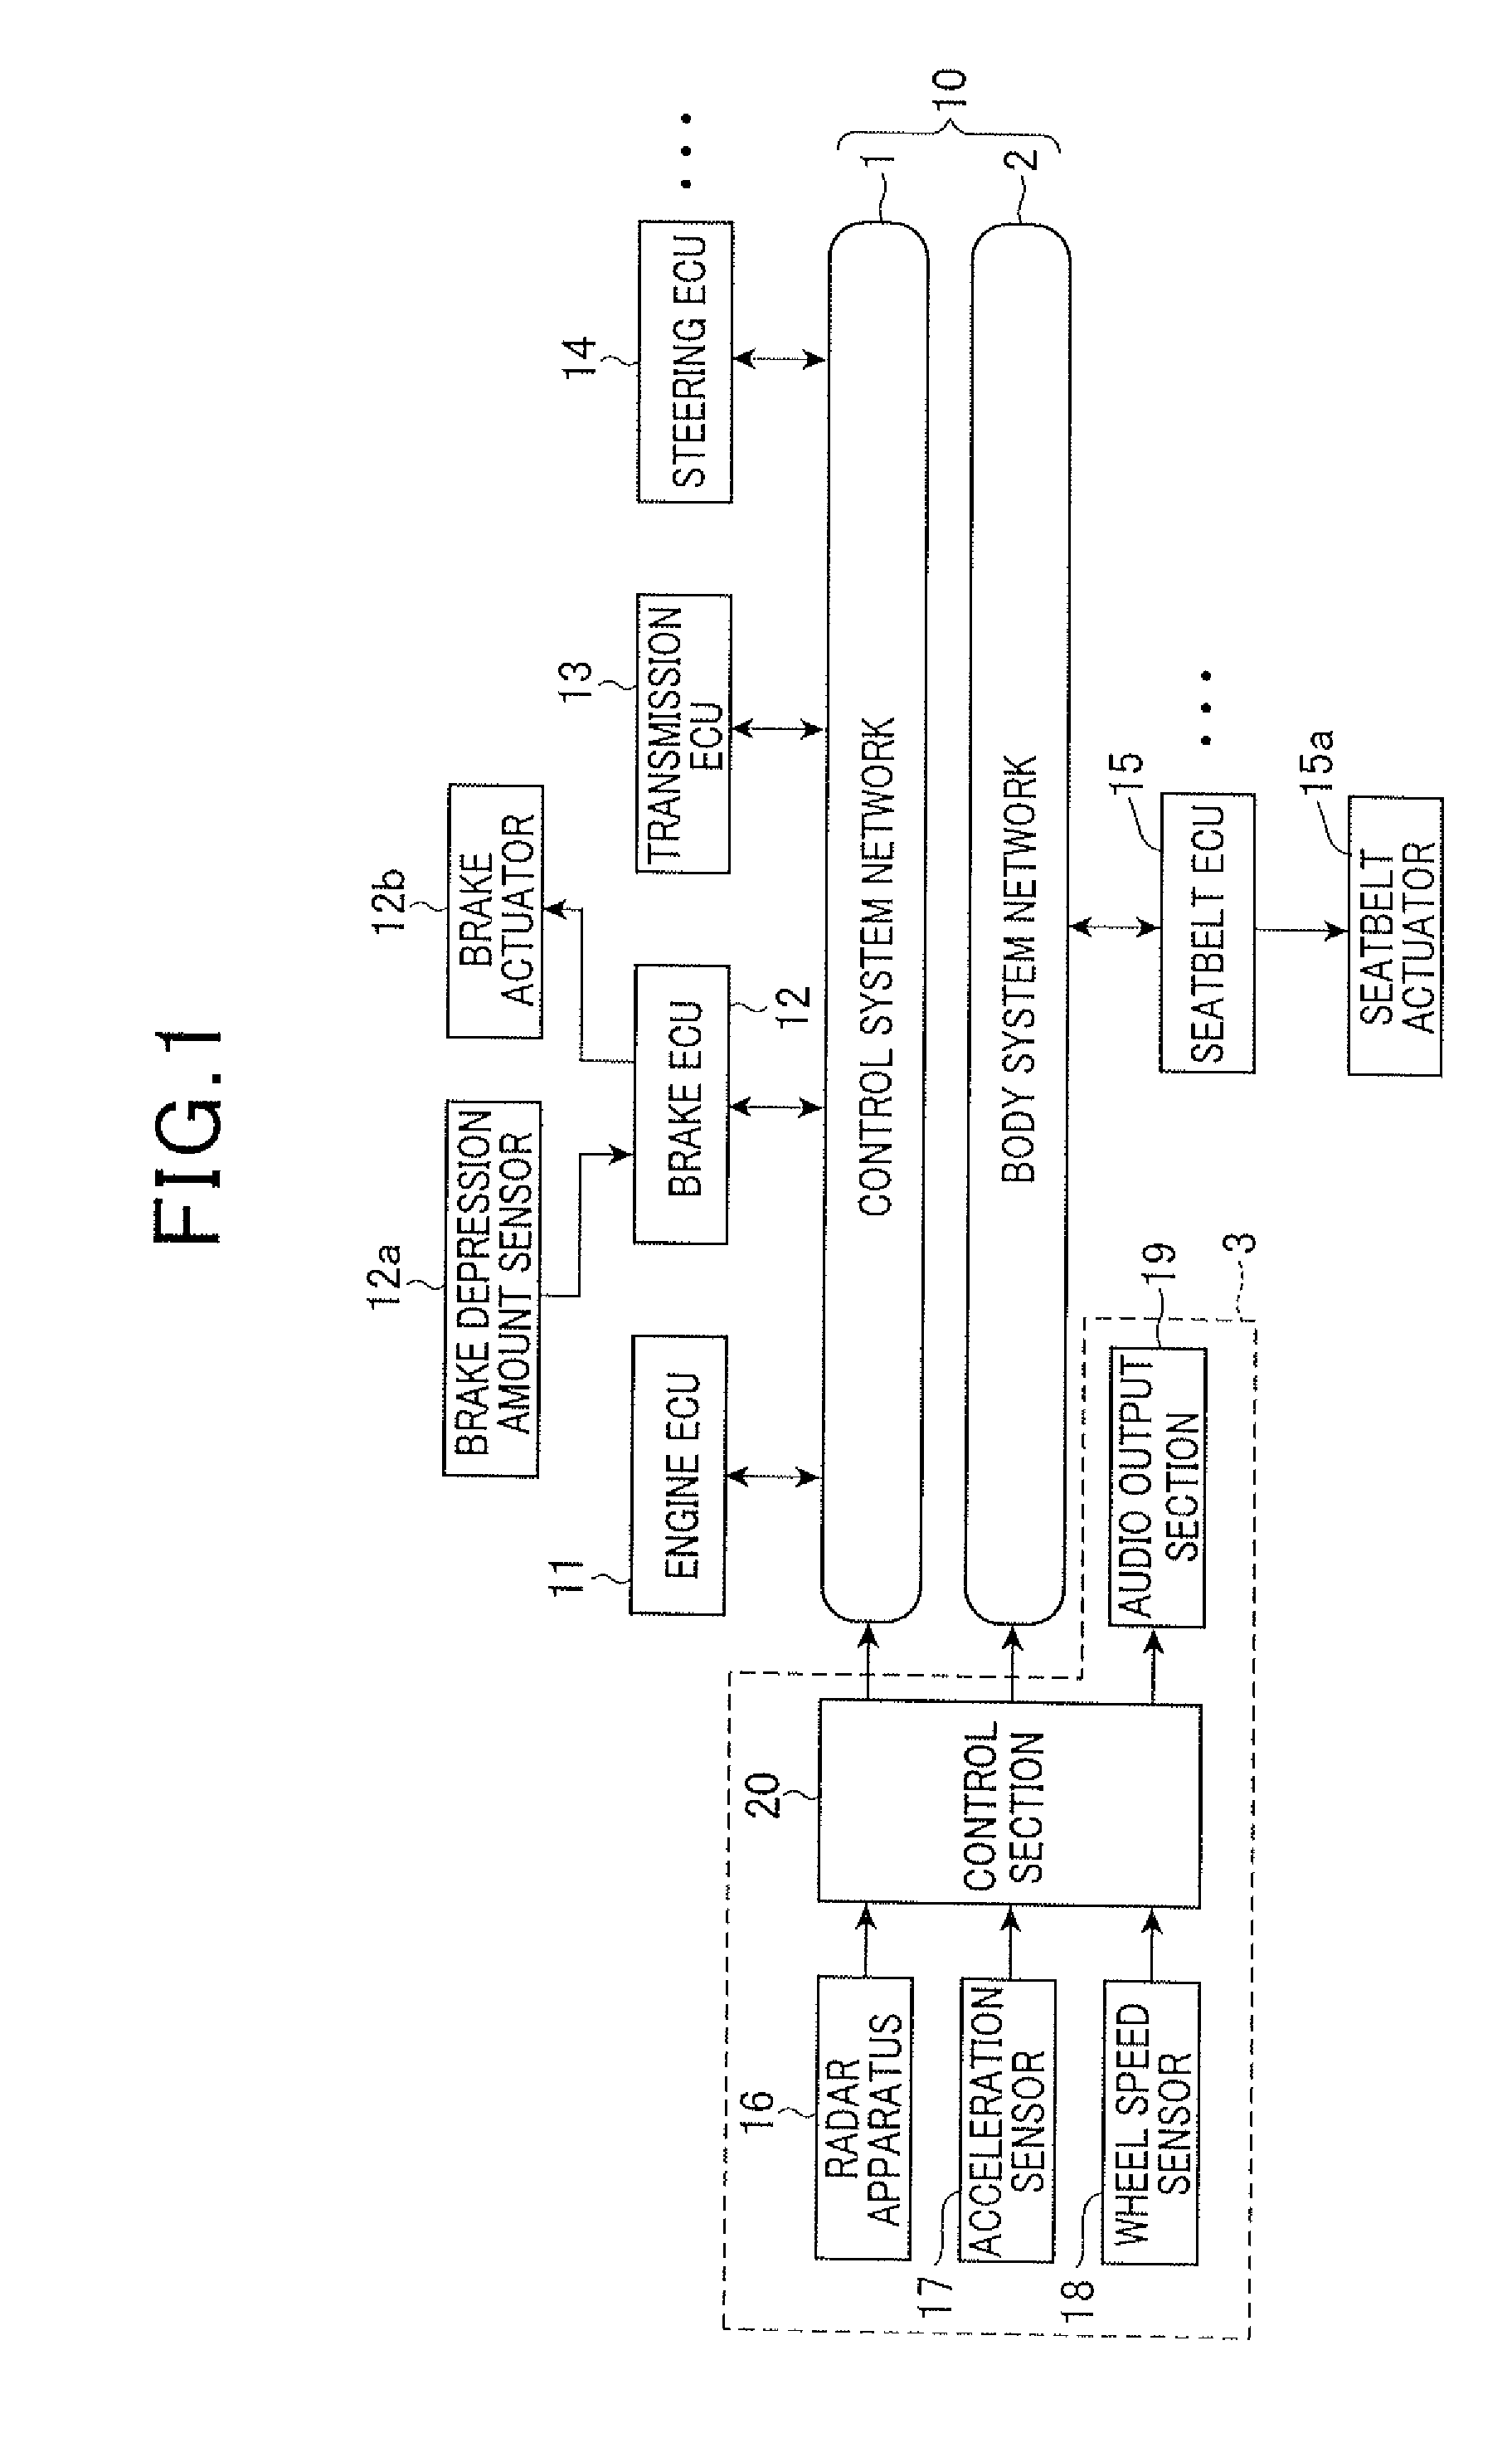 Vehicle-mounted safety control apparatus